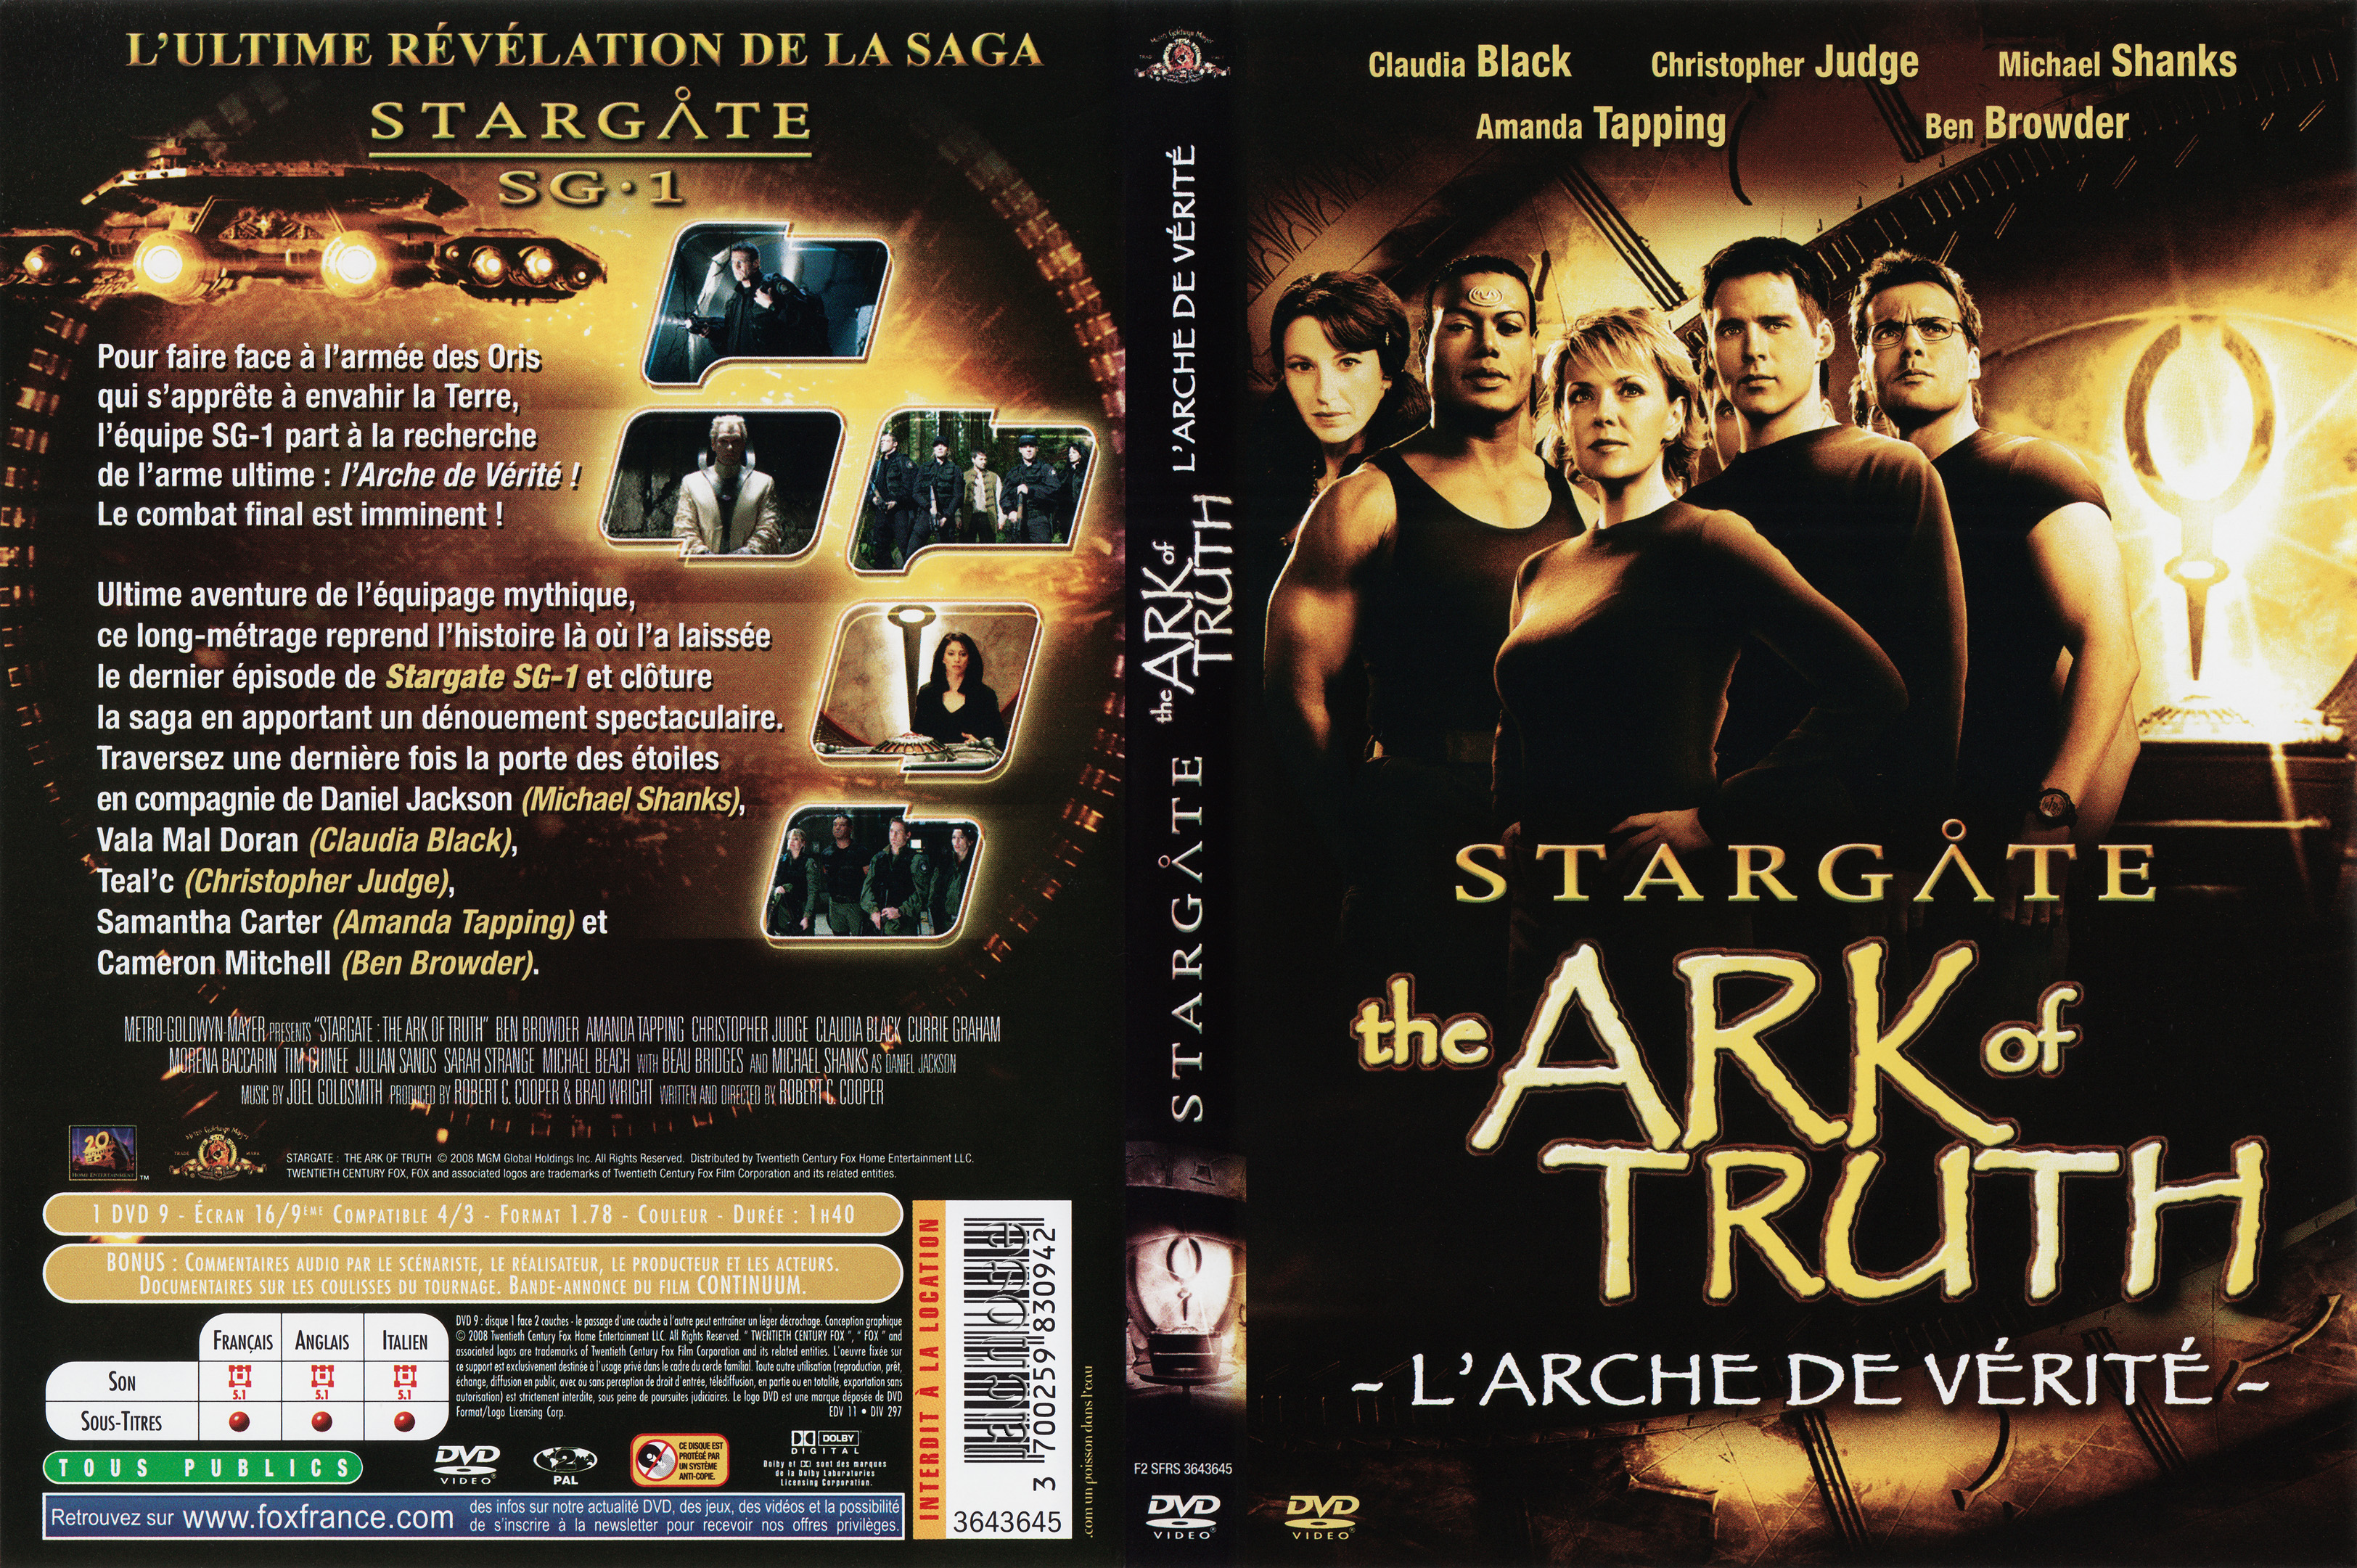 Jaquette DVD Stargate The ark of truth - L